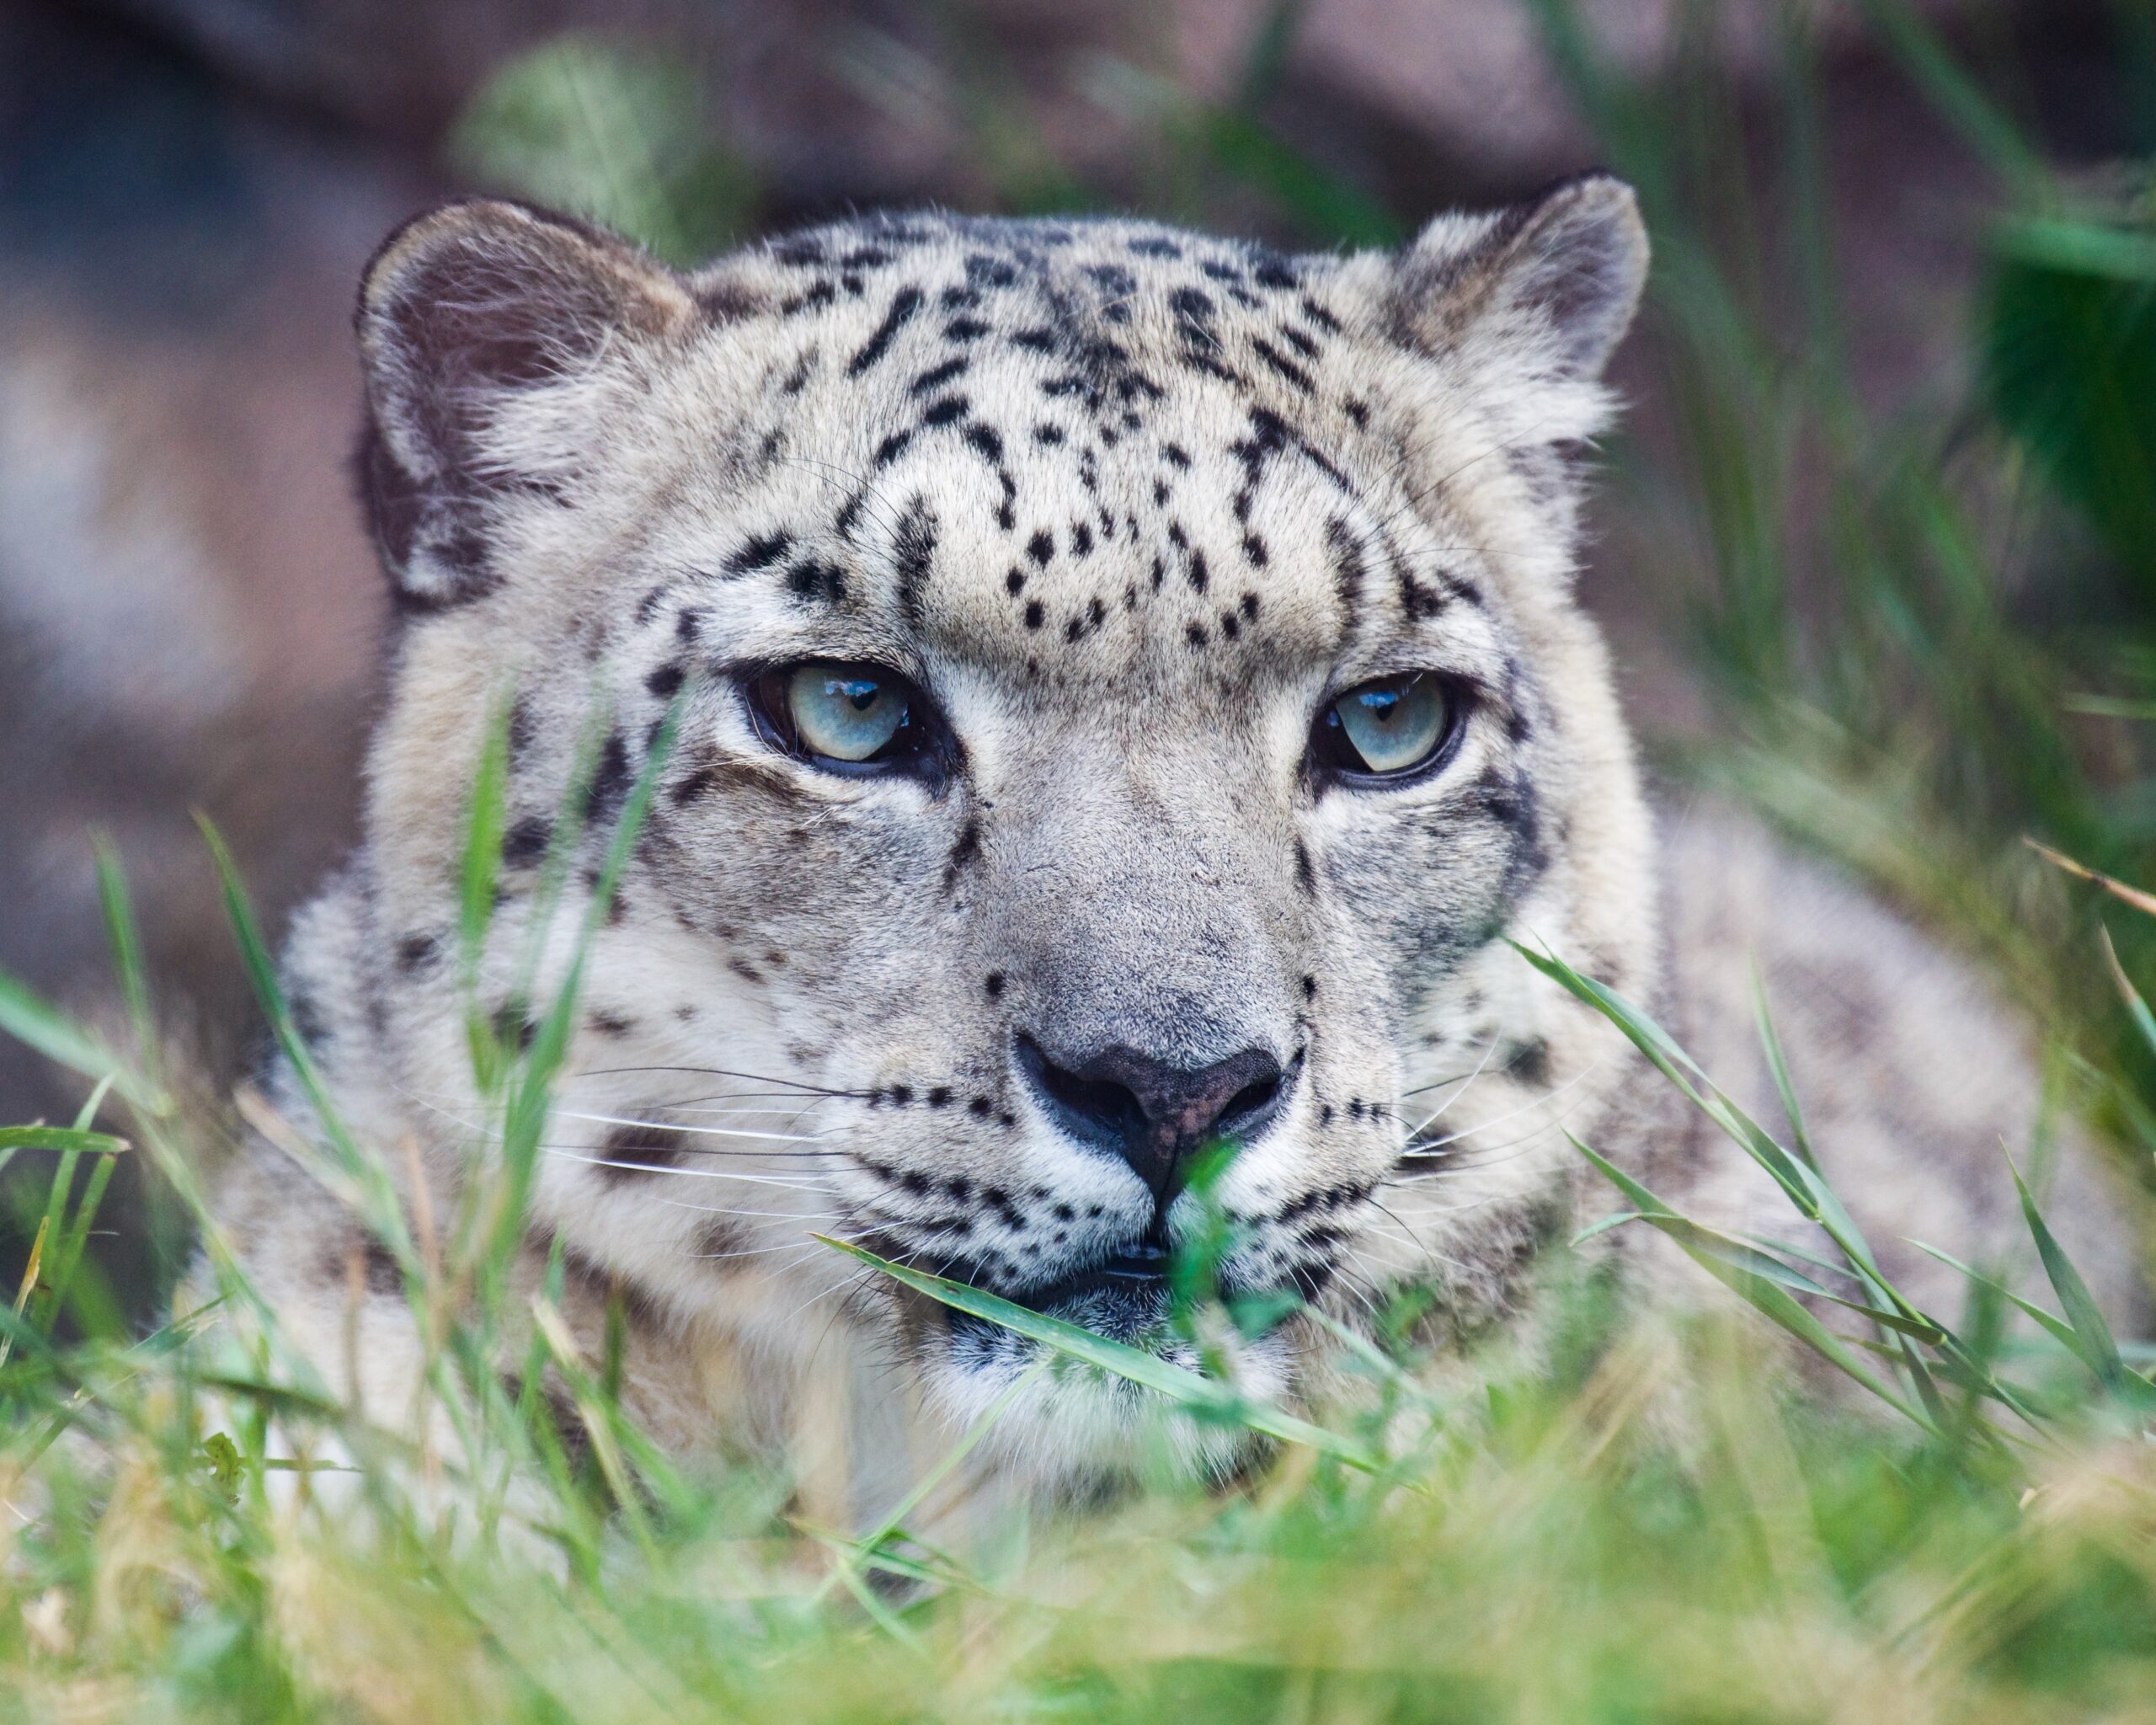 How DSWF is Protecting & Saving Snow Leopards